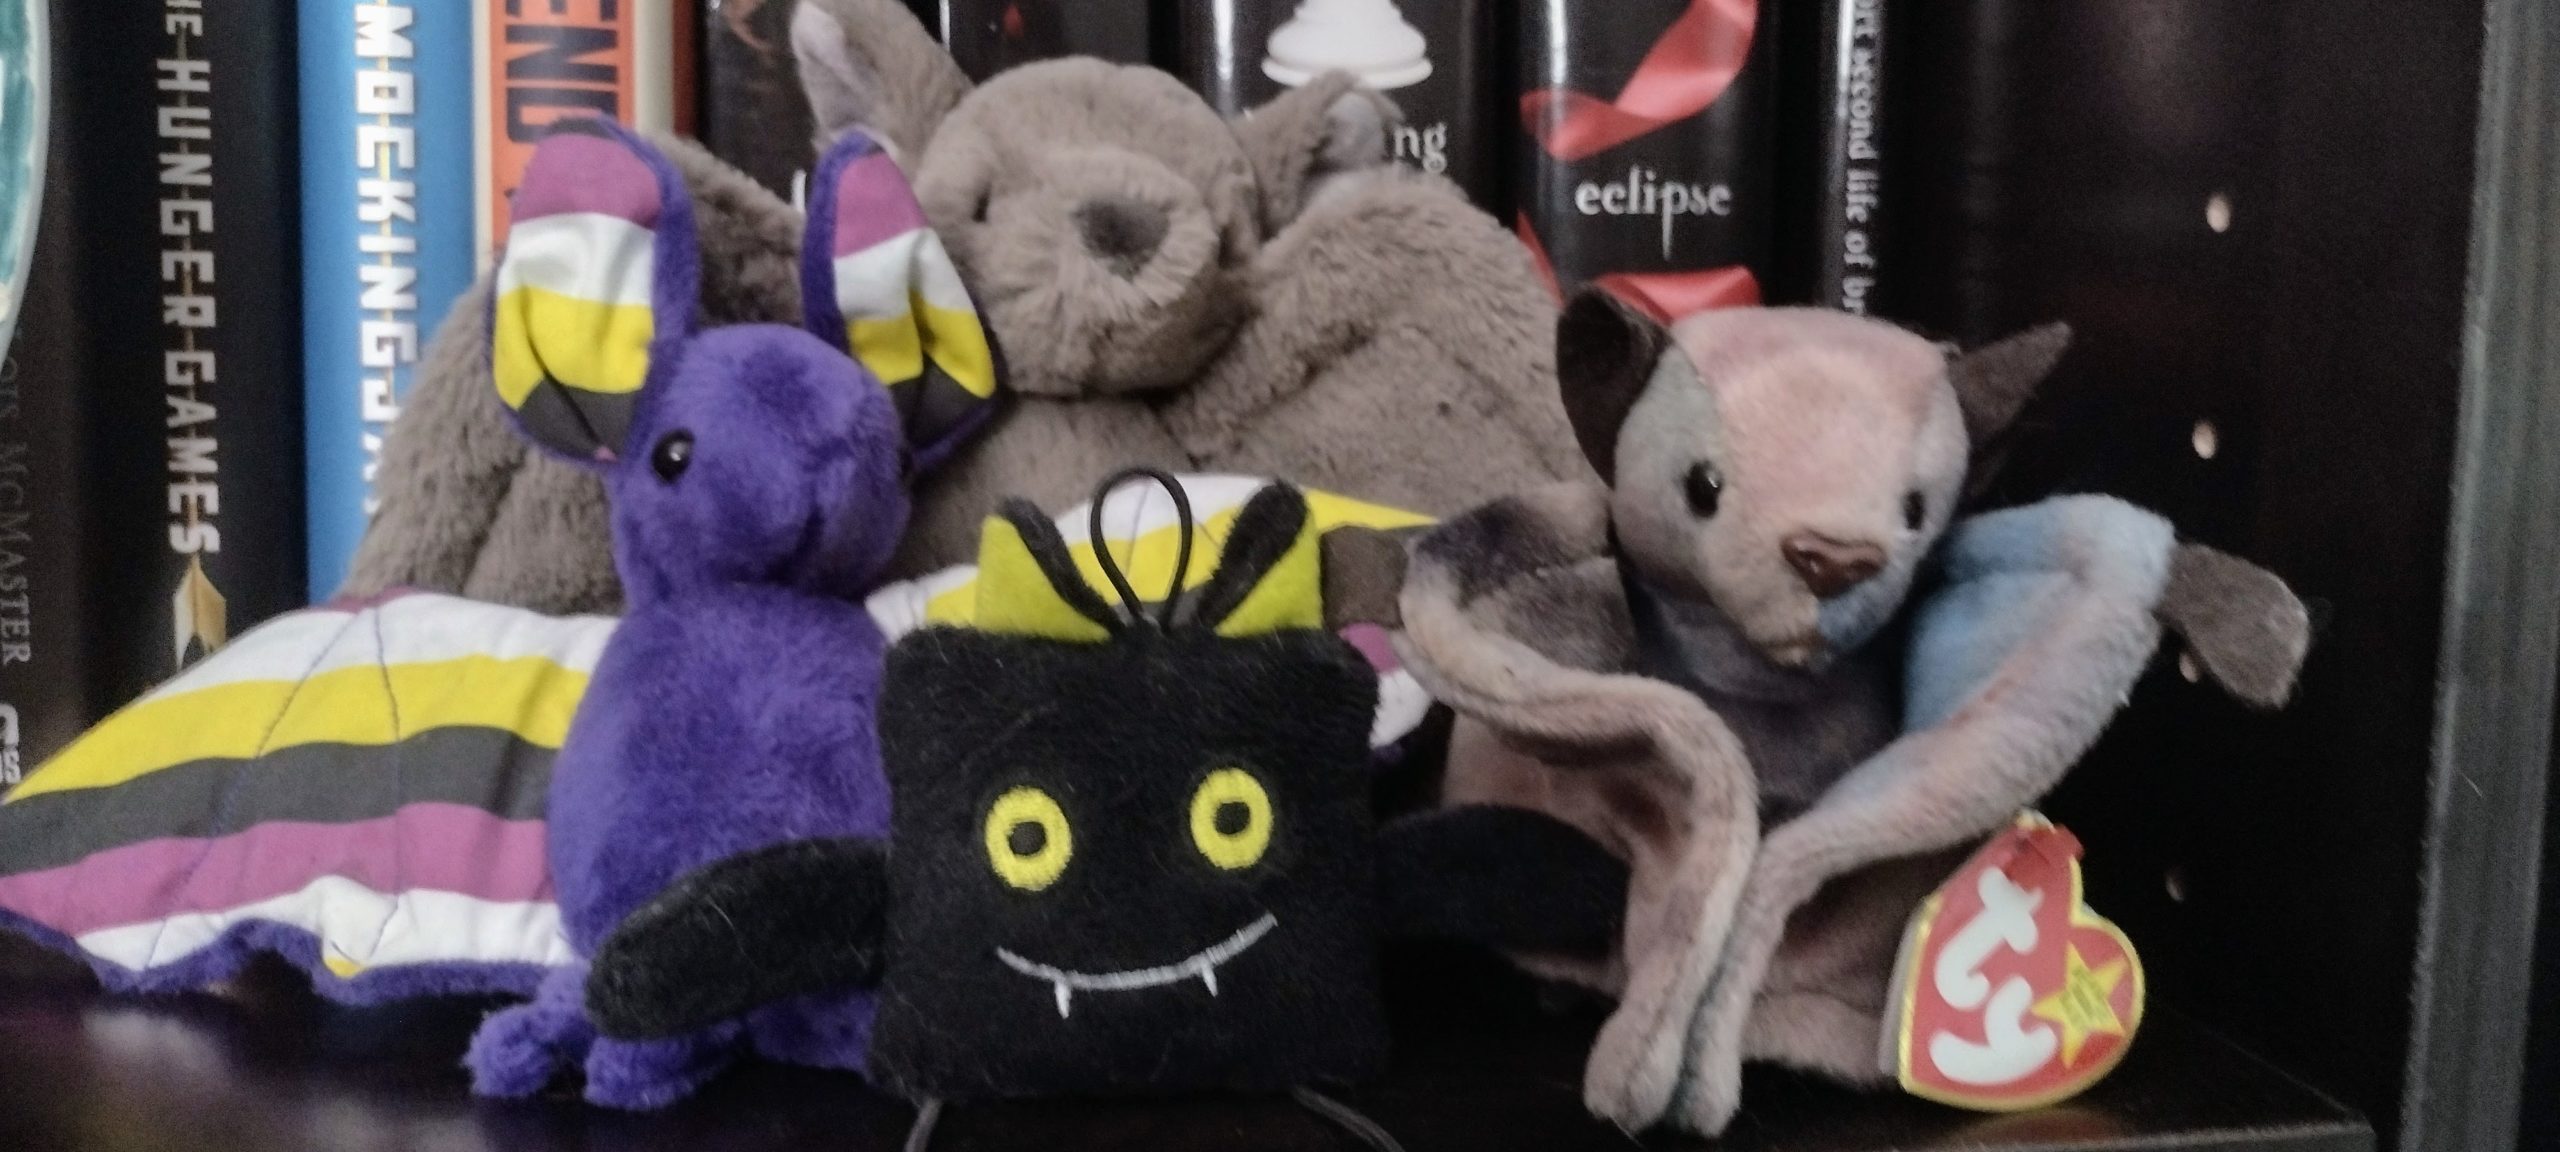 a colony of toy bats, one bears the colors of the non-binary flag, one is just a cute stuffed bat, one is a black cat toy with dangly legs, and one is the beanie baby: Batty.